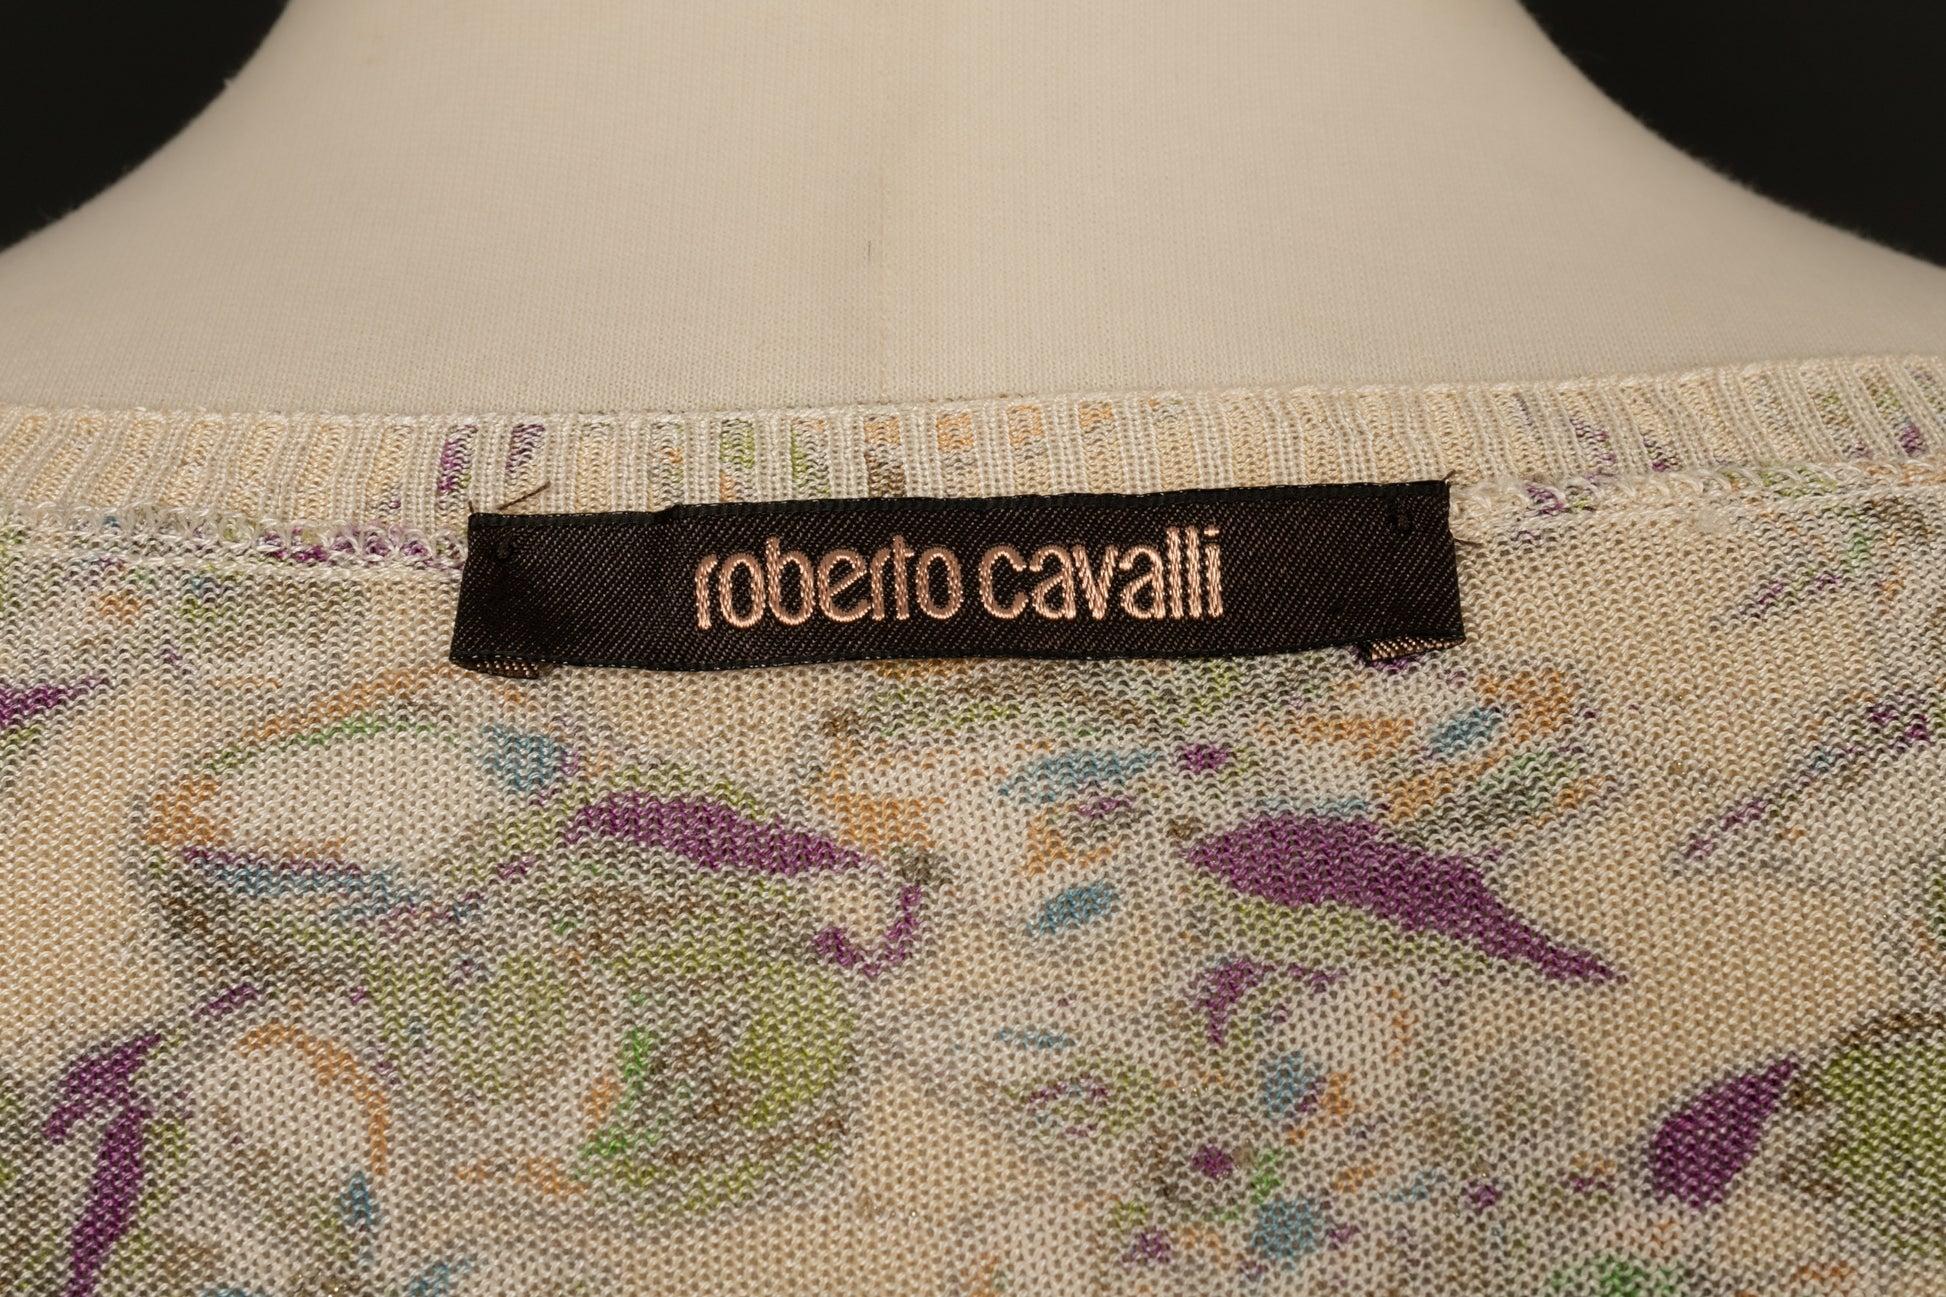 Roberto Cavalli Printed Cardigan with Flower Patterns For Sale 3